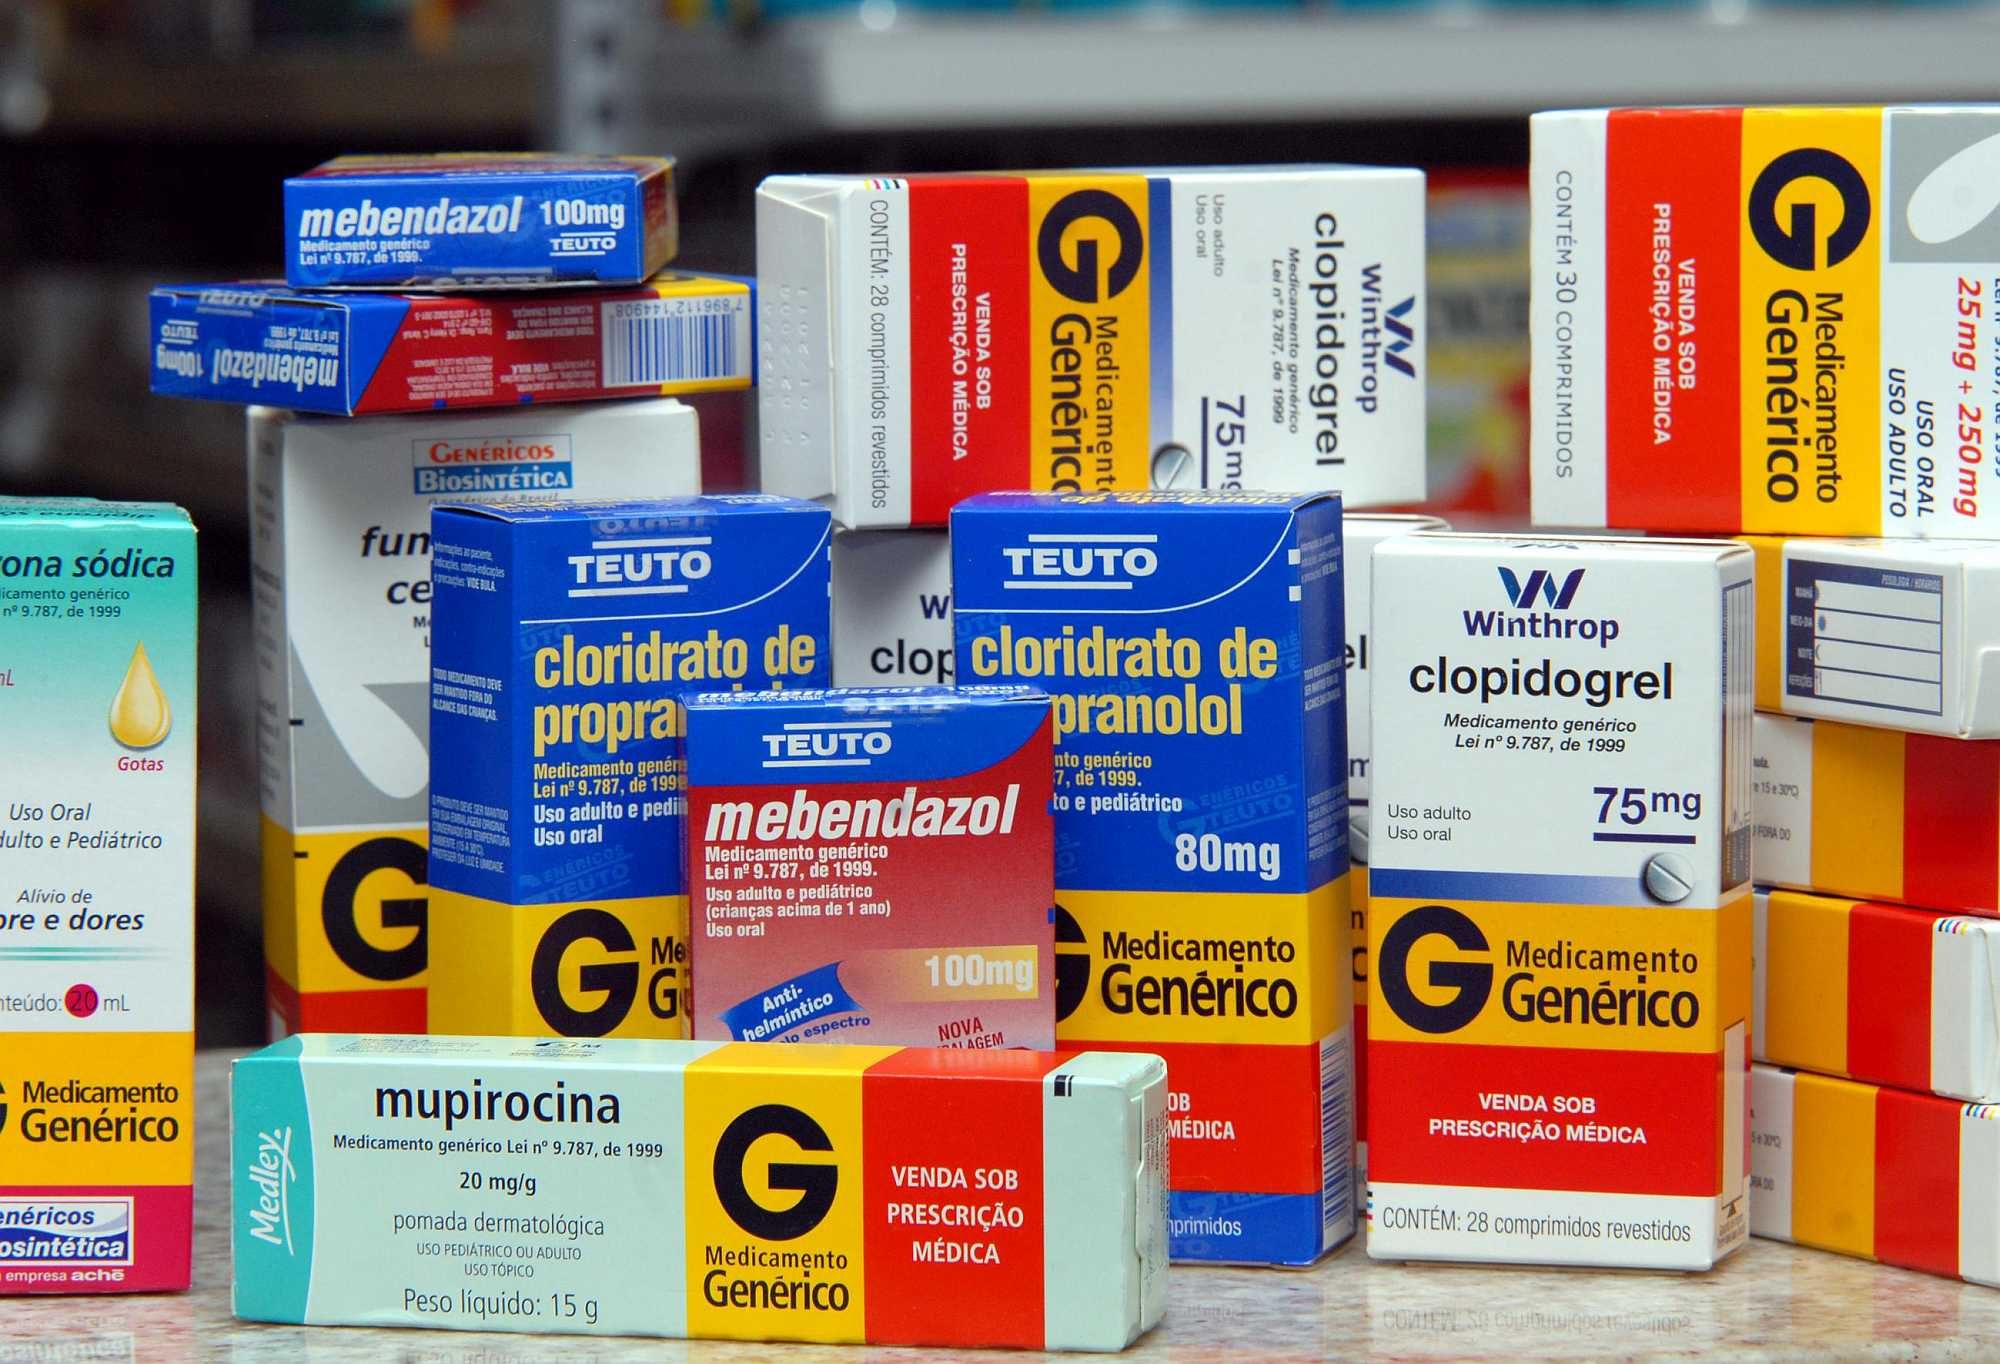 Generics have special packaging in Brazil - Photo by ABr